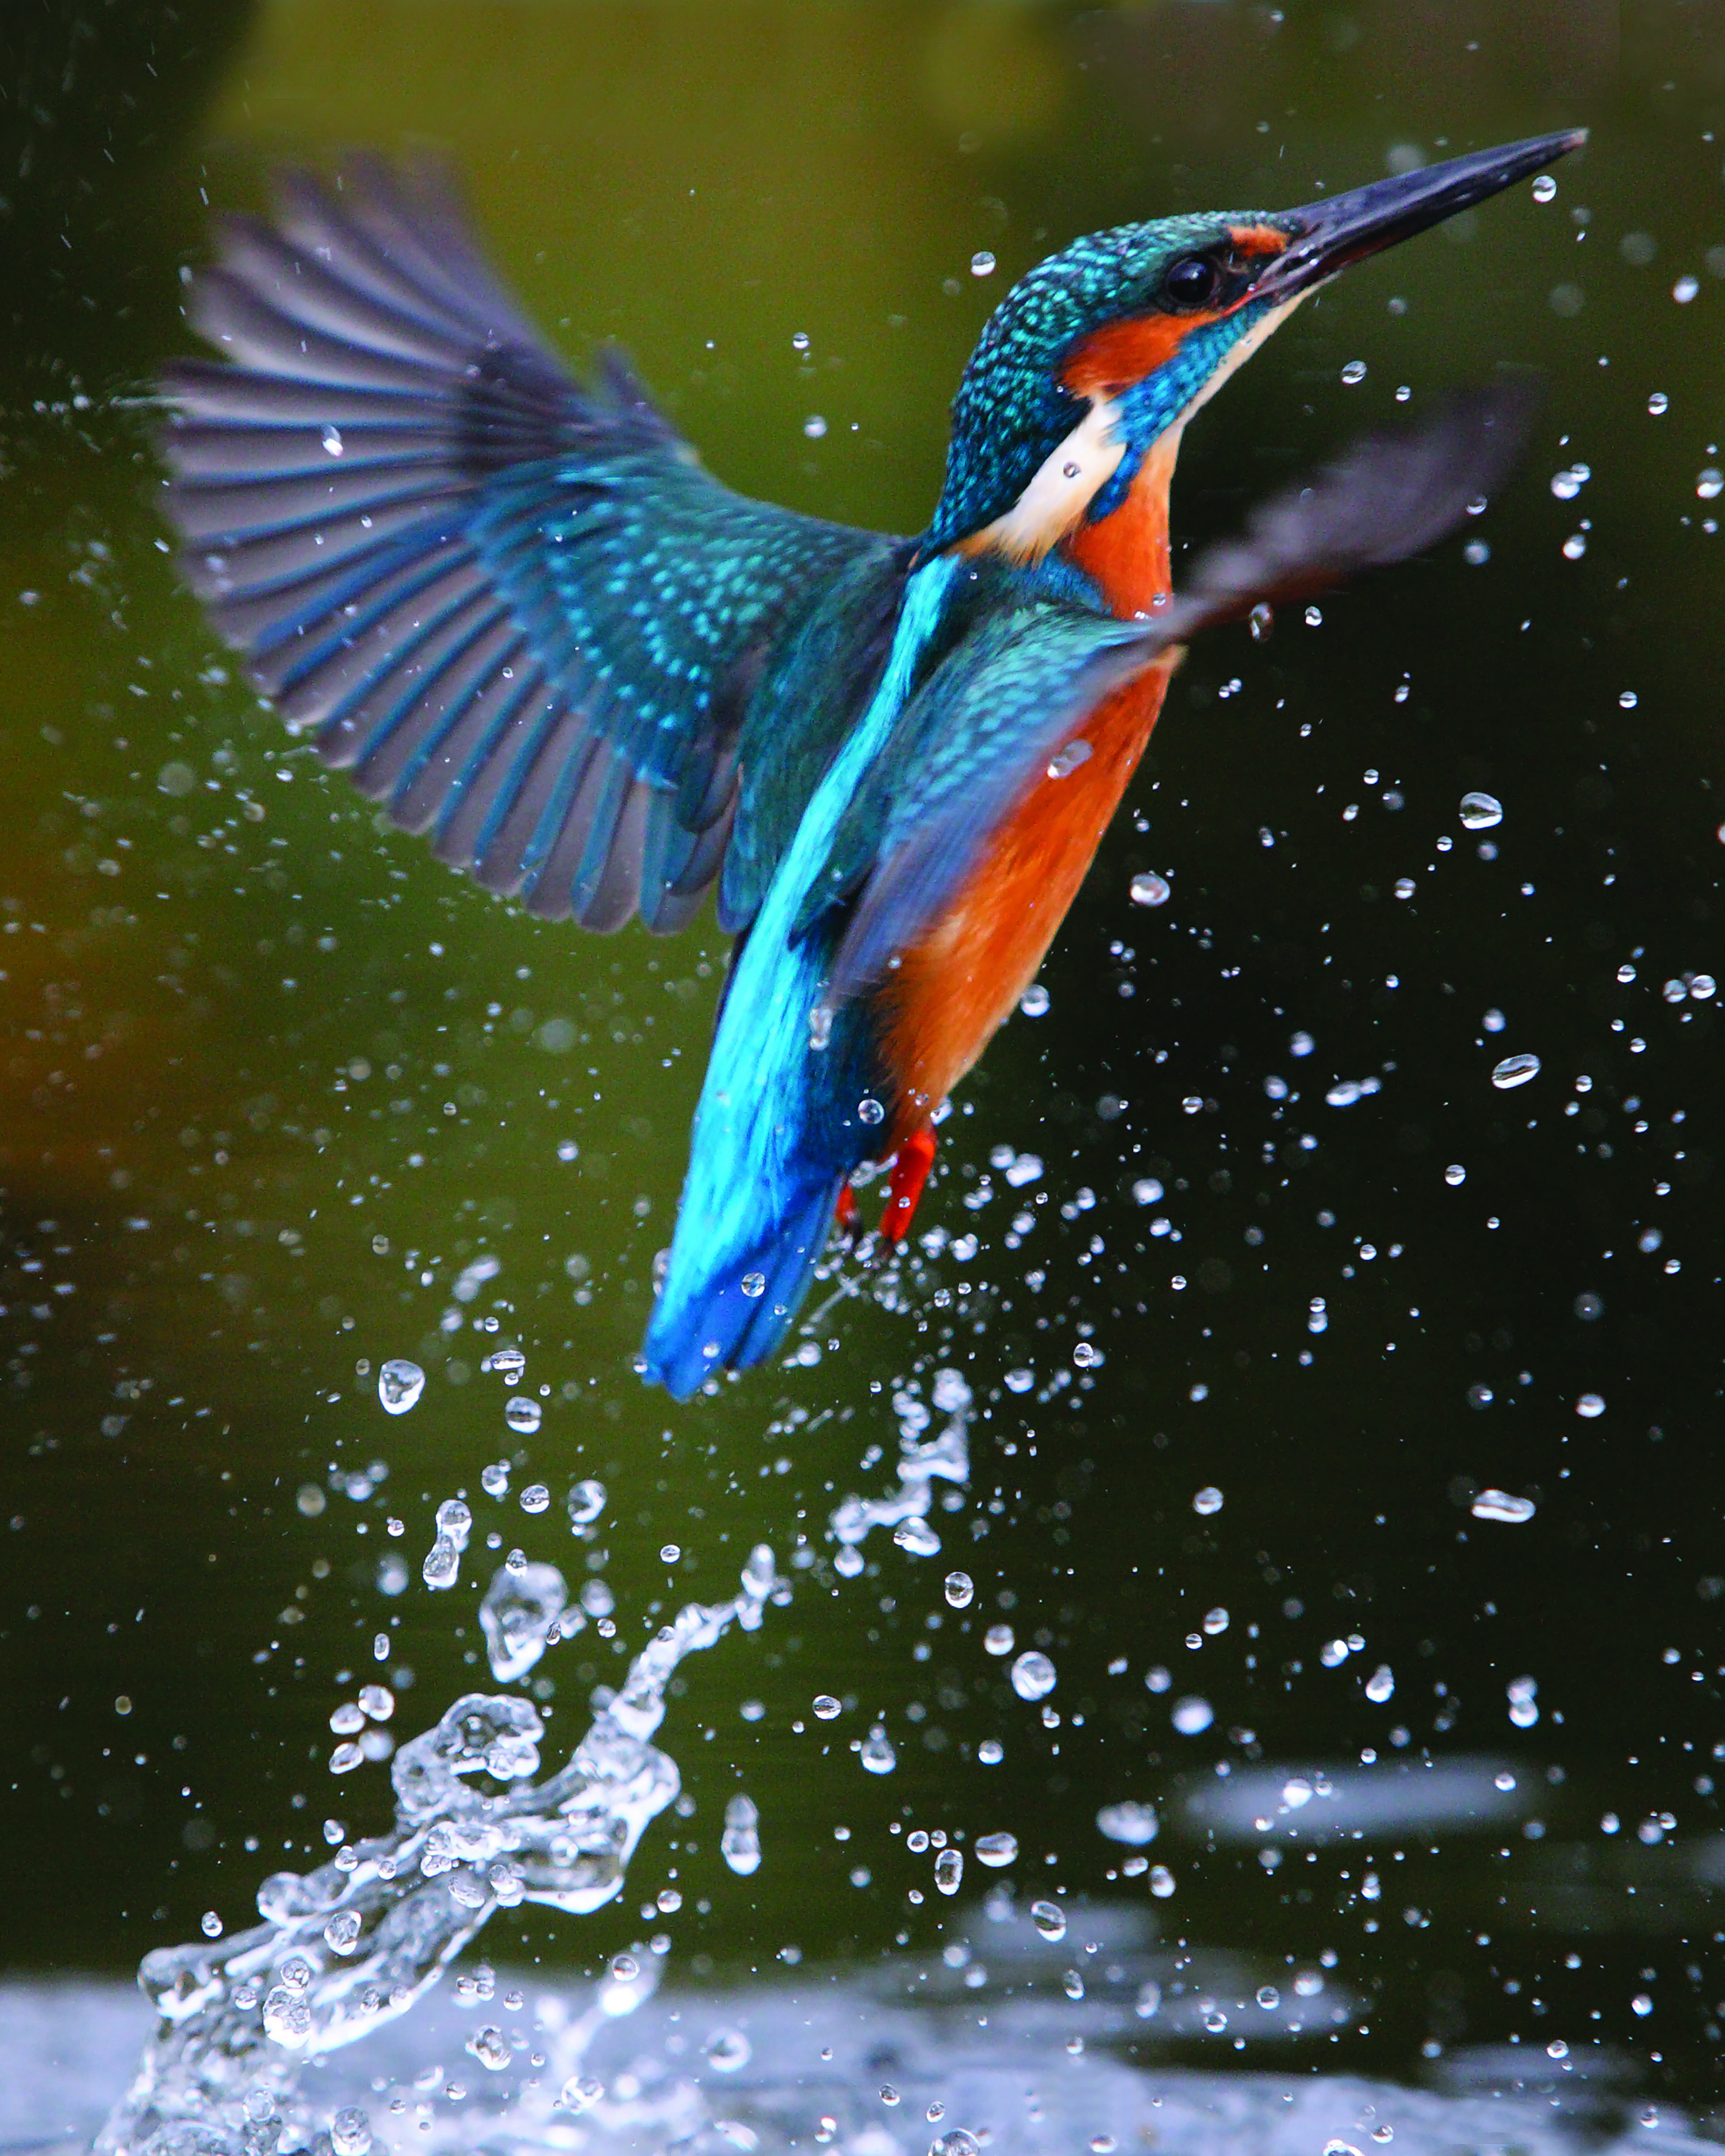 The kingfisher tears upstream! Pic credit: Laurie Campbell.